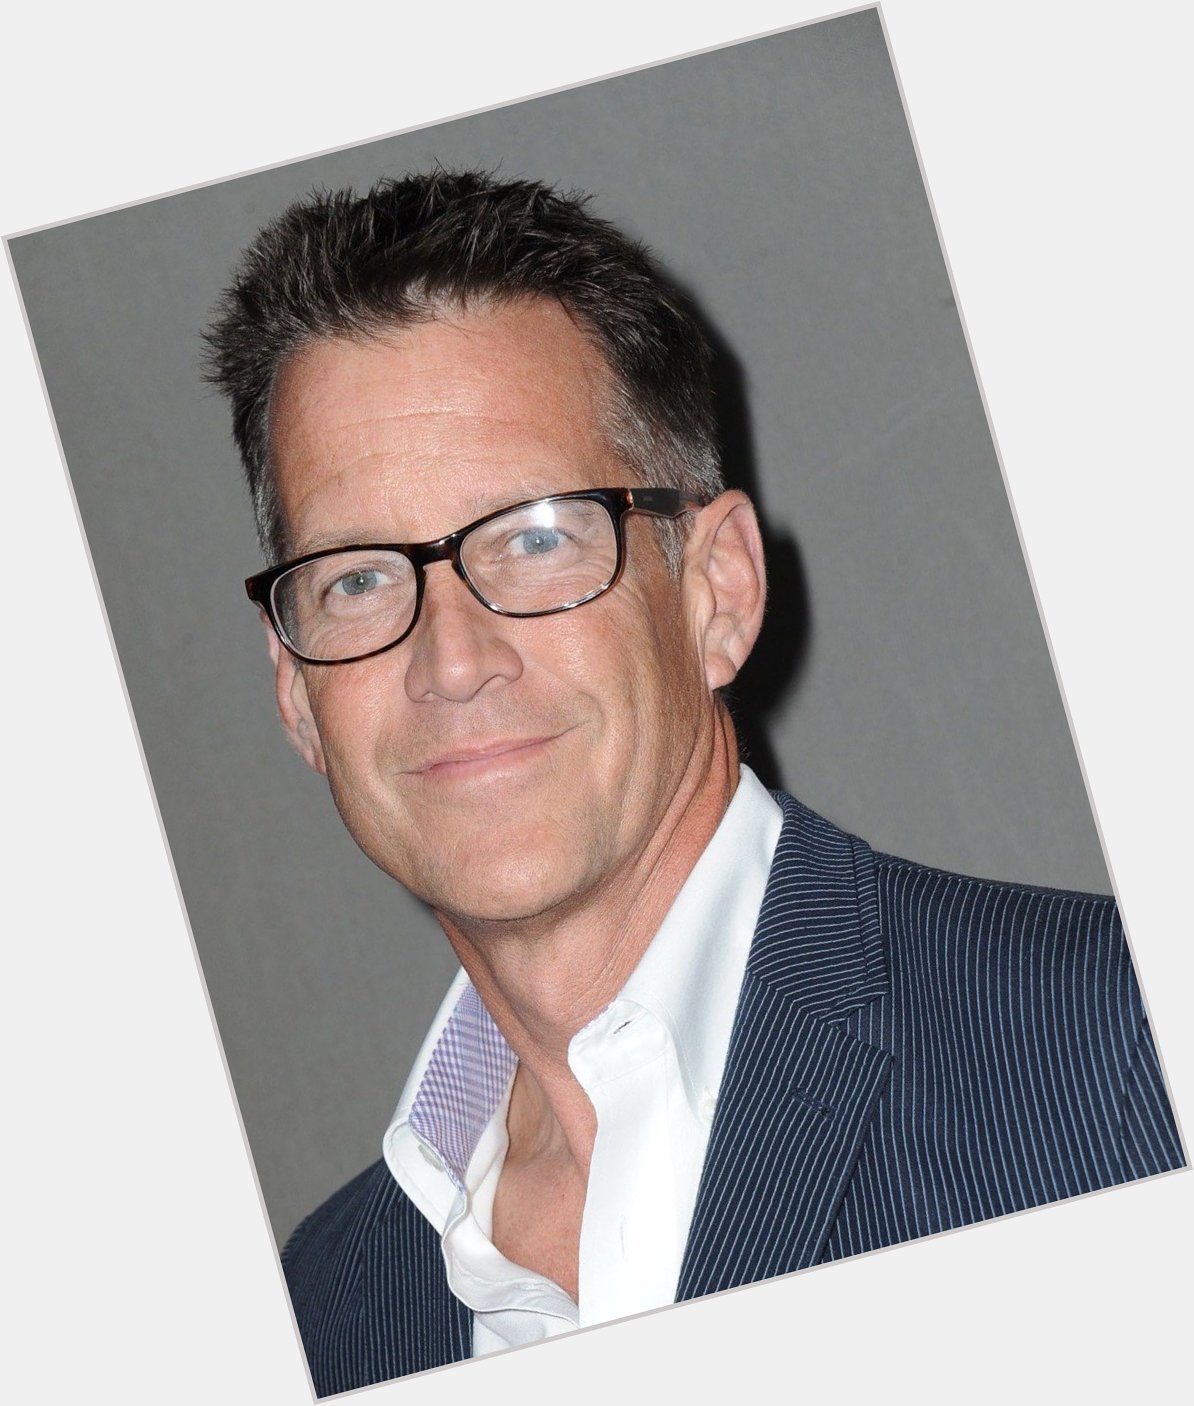 HAPPY 56th BIRTHDAY to JAMES DENTON!! 
American actor best known for playing Mike Delfino on Desperate Housewives. 